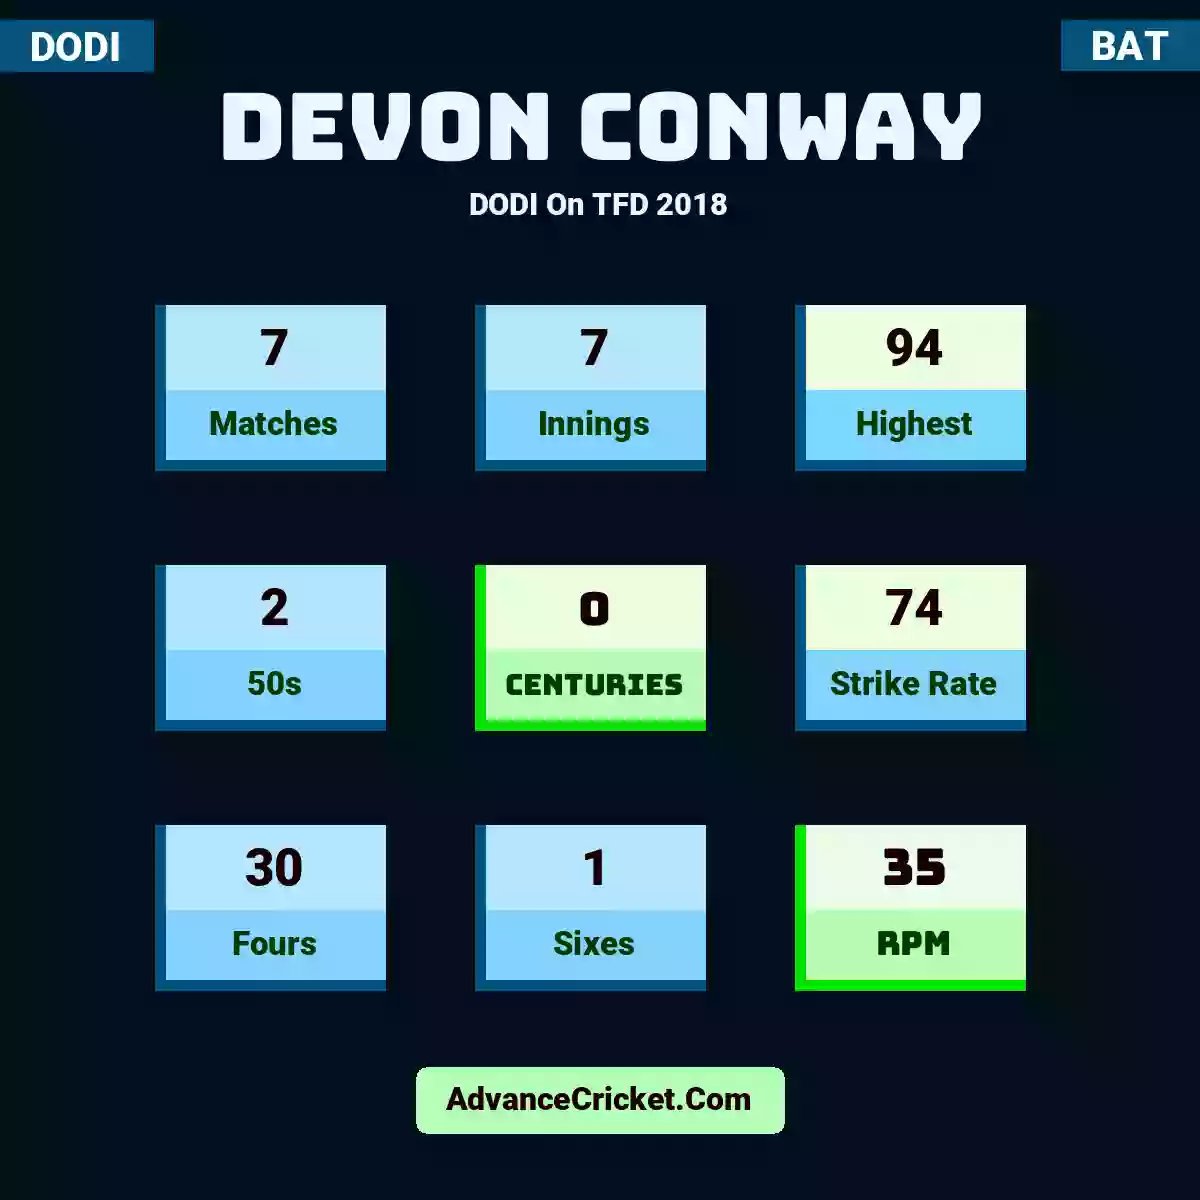 Devon Conway DODI  On TFD 2018, Devon Conway played 7 matches, scored 94 runs as highest, 2 half-centuries, and 0 centuries, with a strike rate of 74. D.Conway hit 30 fours and 1 sixes, with an RPM of 35.